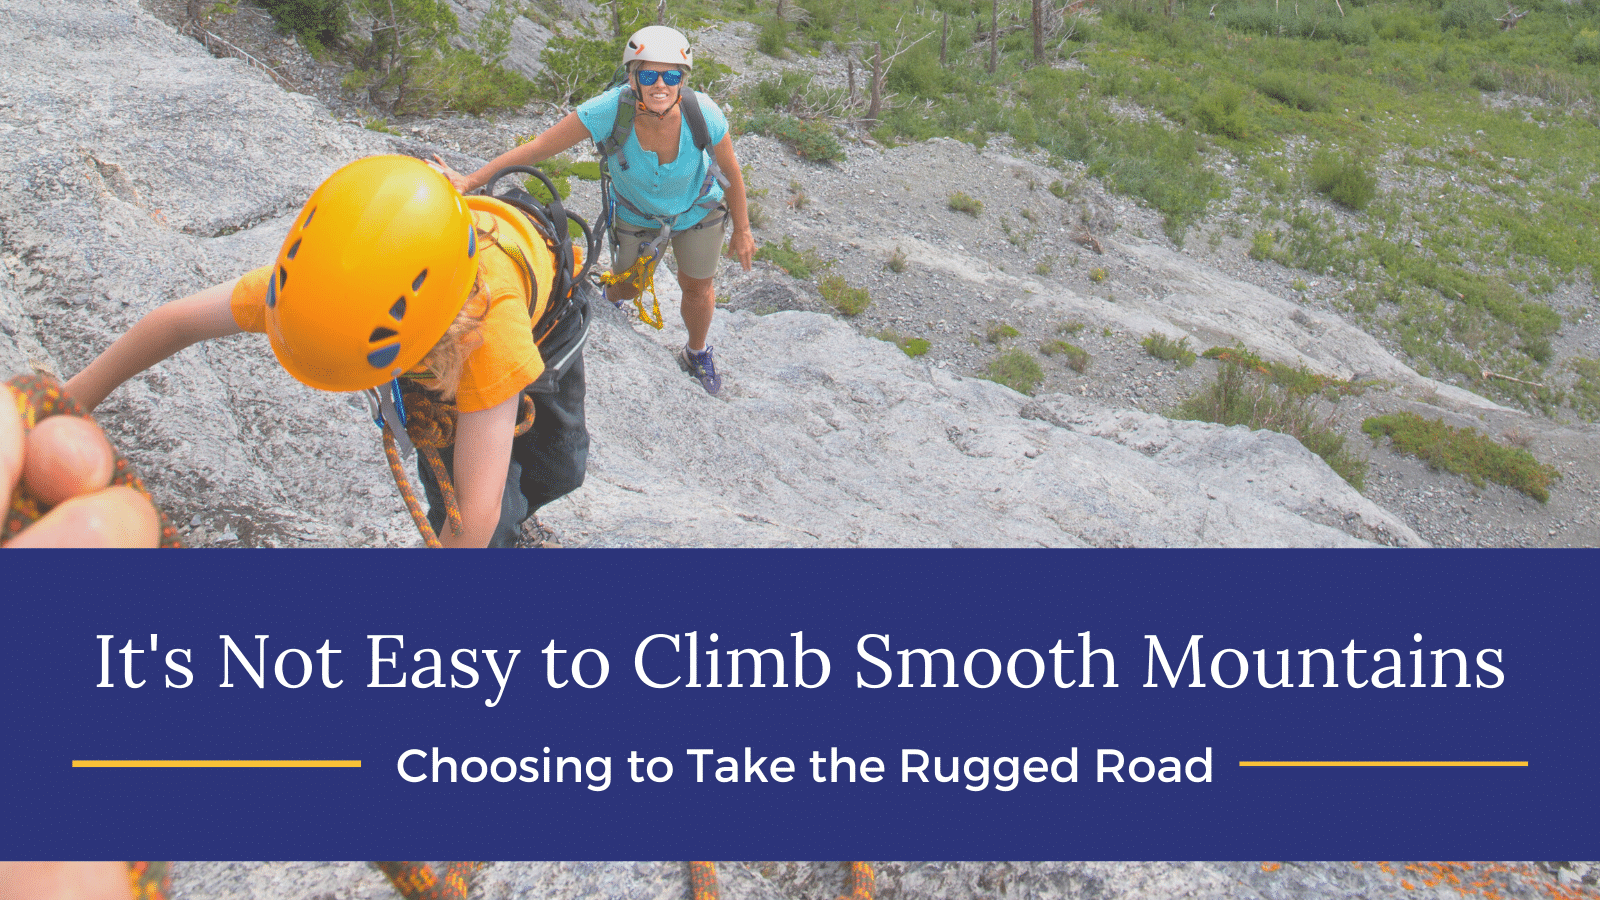 It’s Not Easy to Climb Smooth Mountains